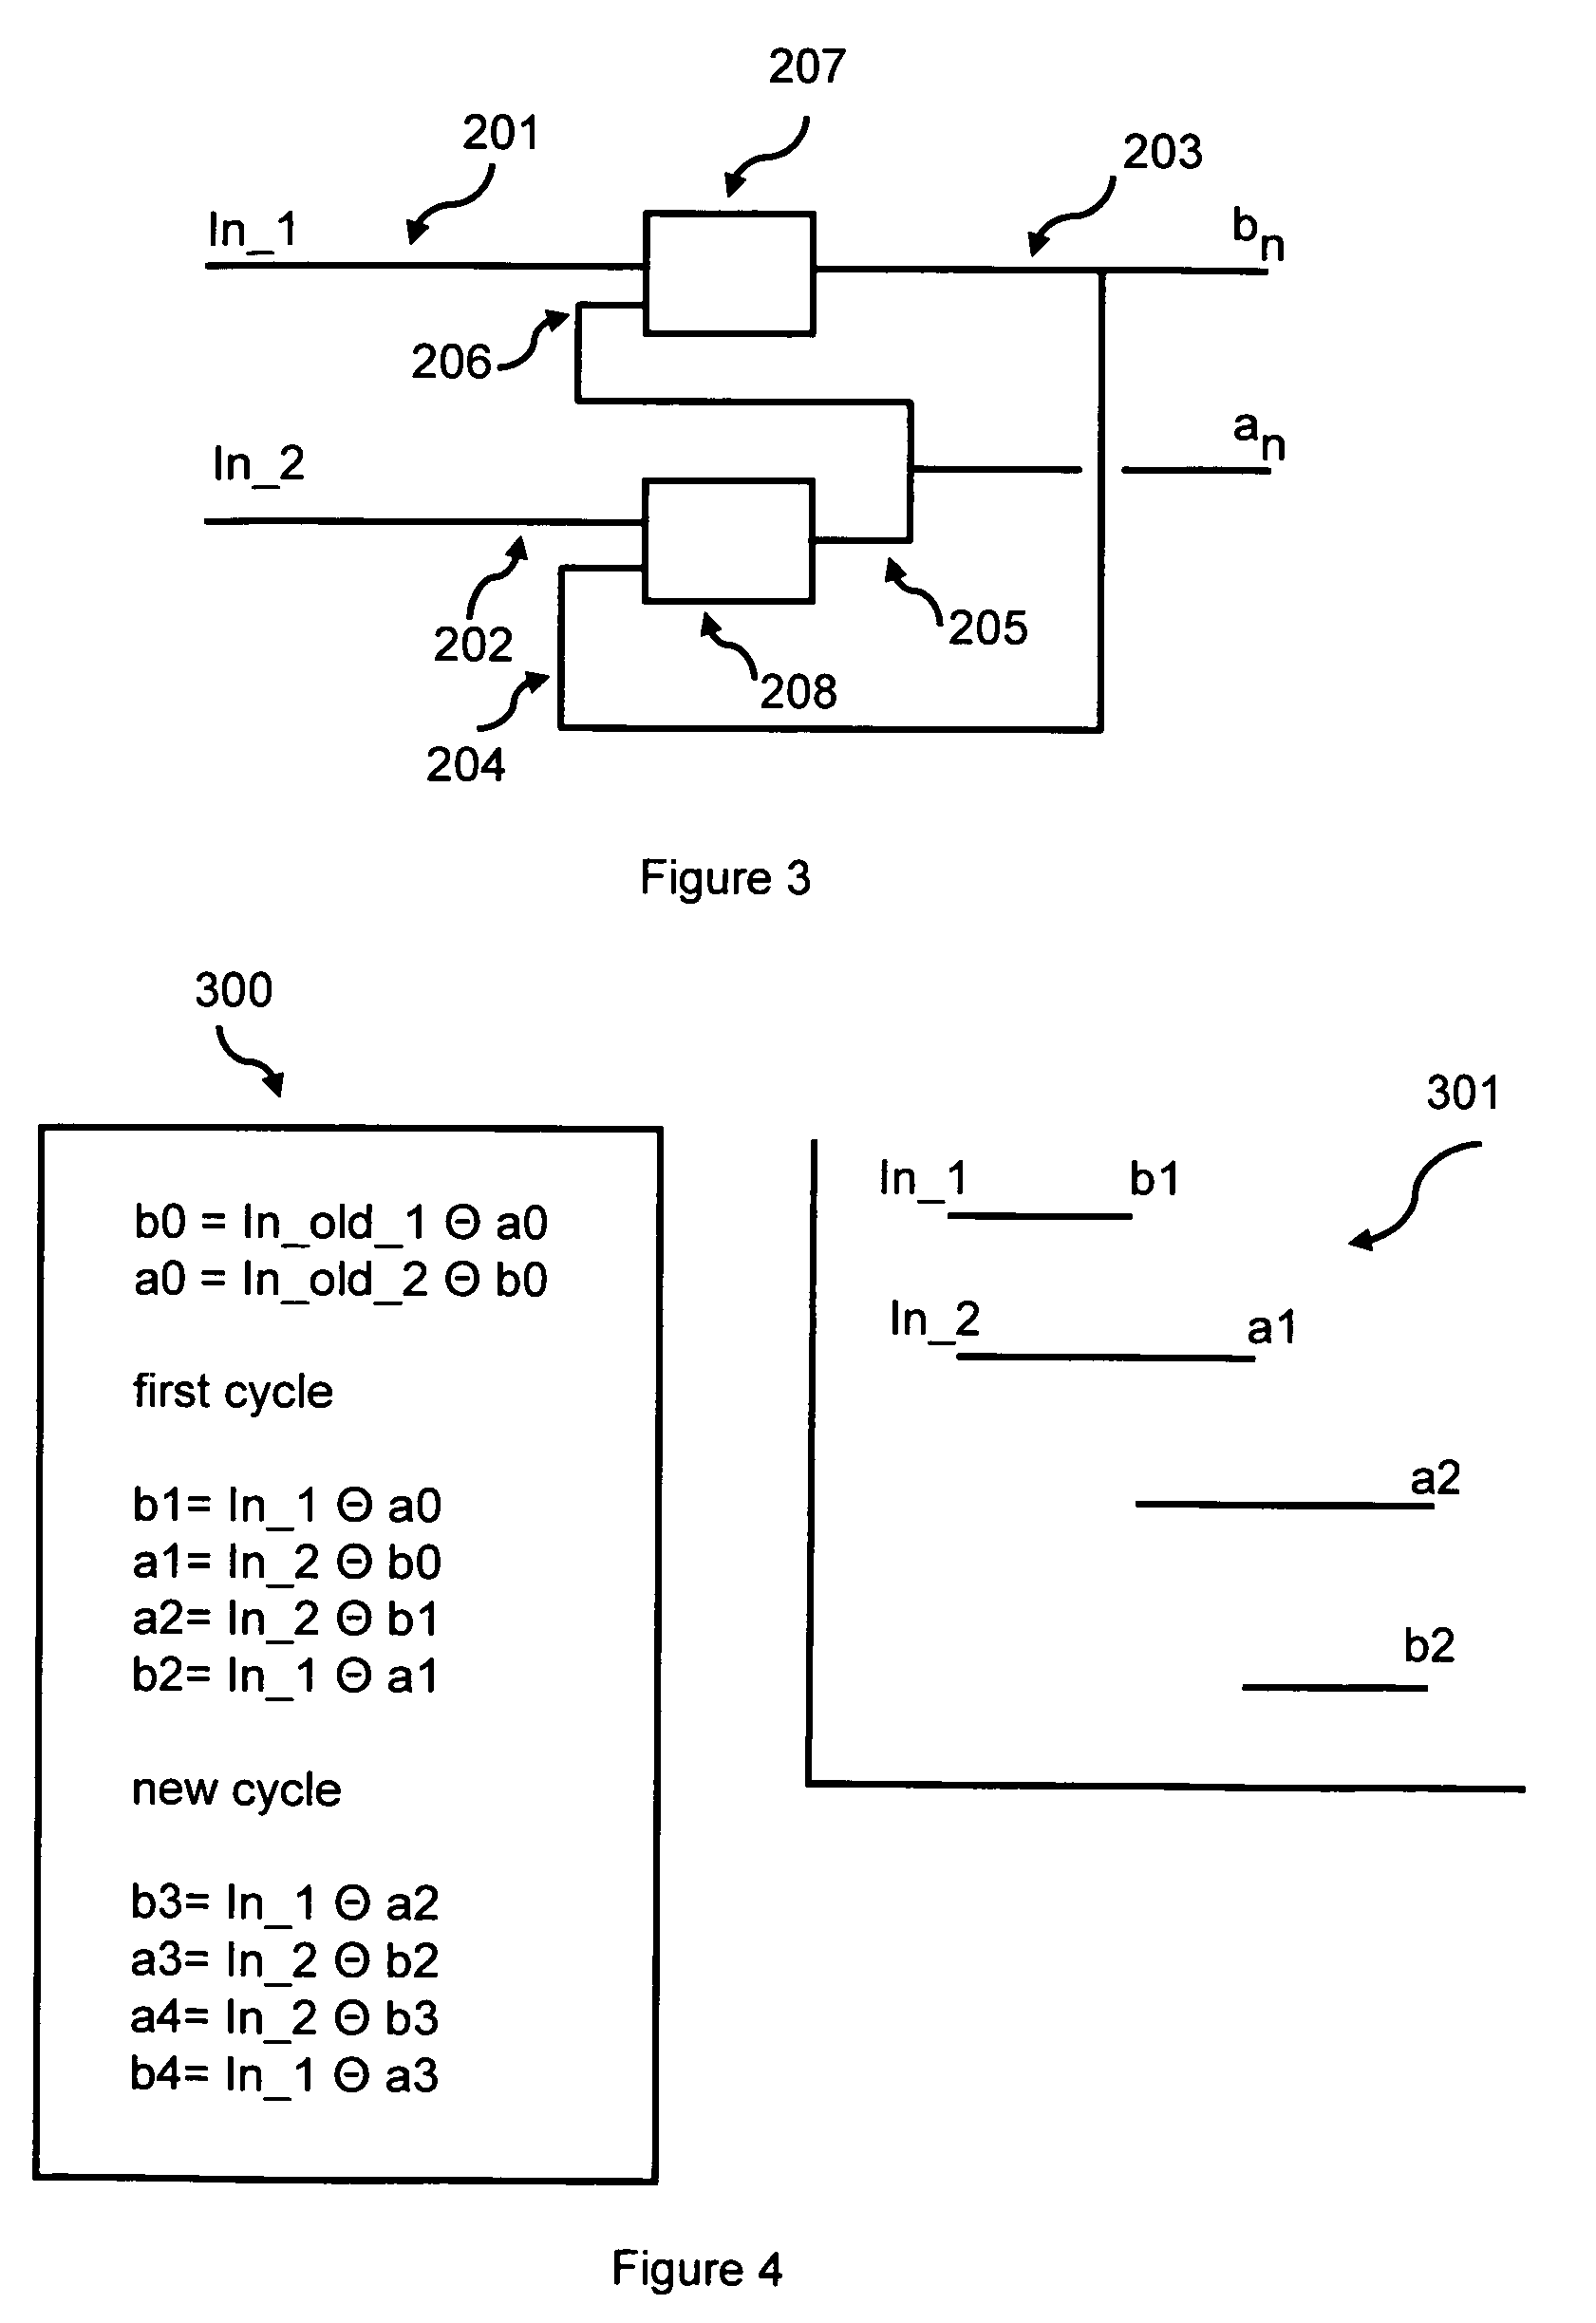 Multi-valued digital information retaining elements and memory devices